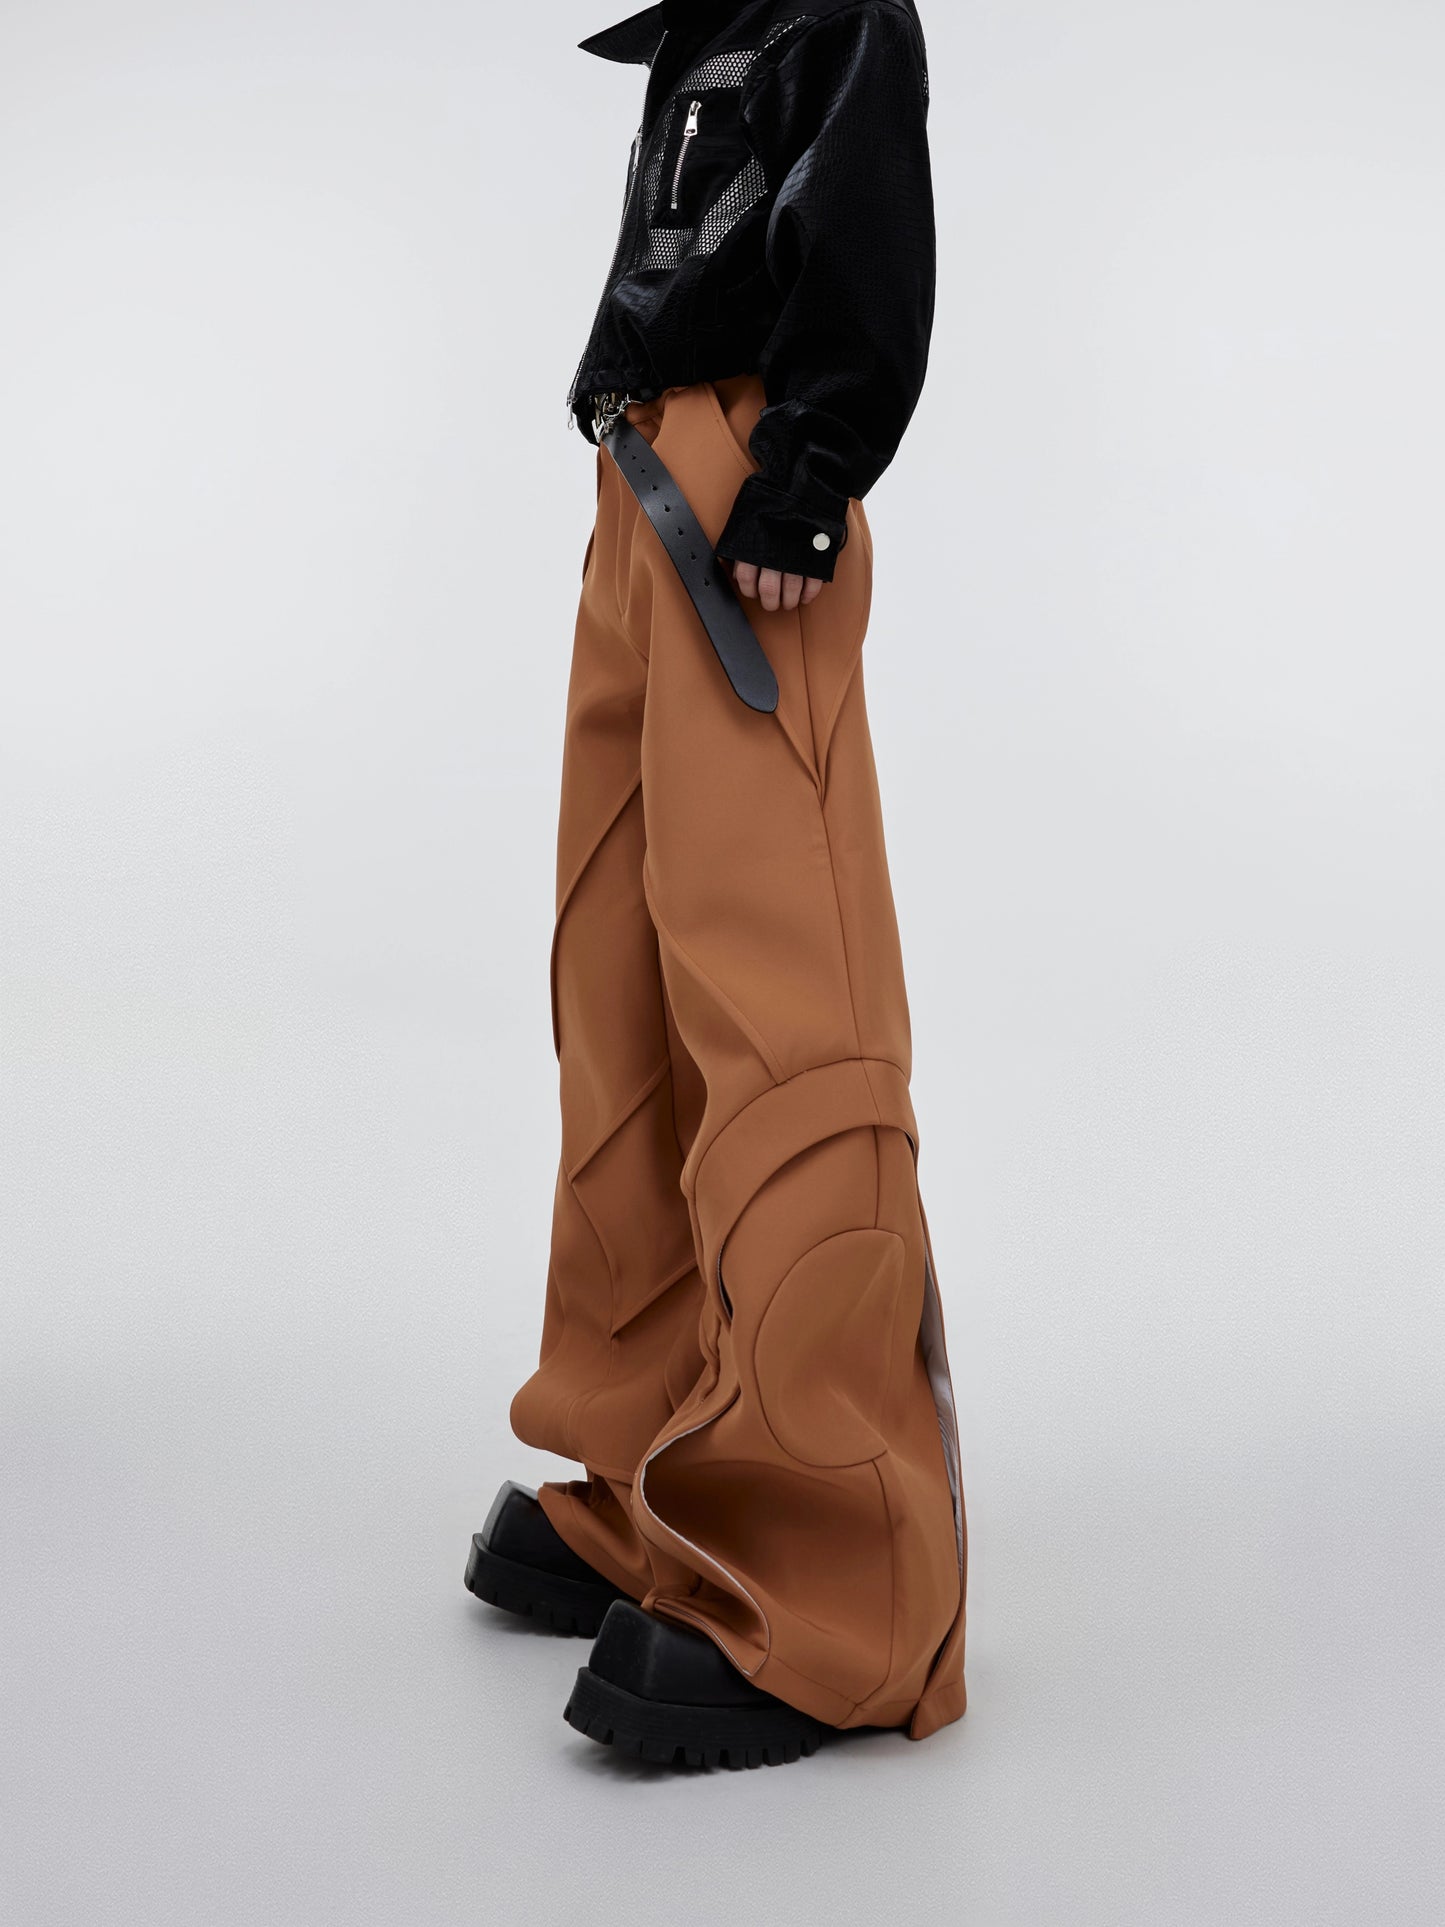 CulturE's niche lines are deconstructed and stitched with draped trousers, solid flared slacks, and double-layered design trousers